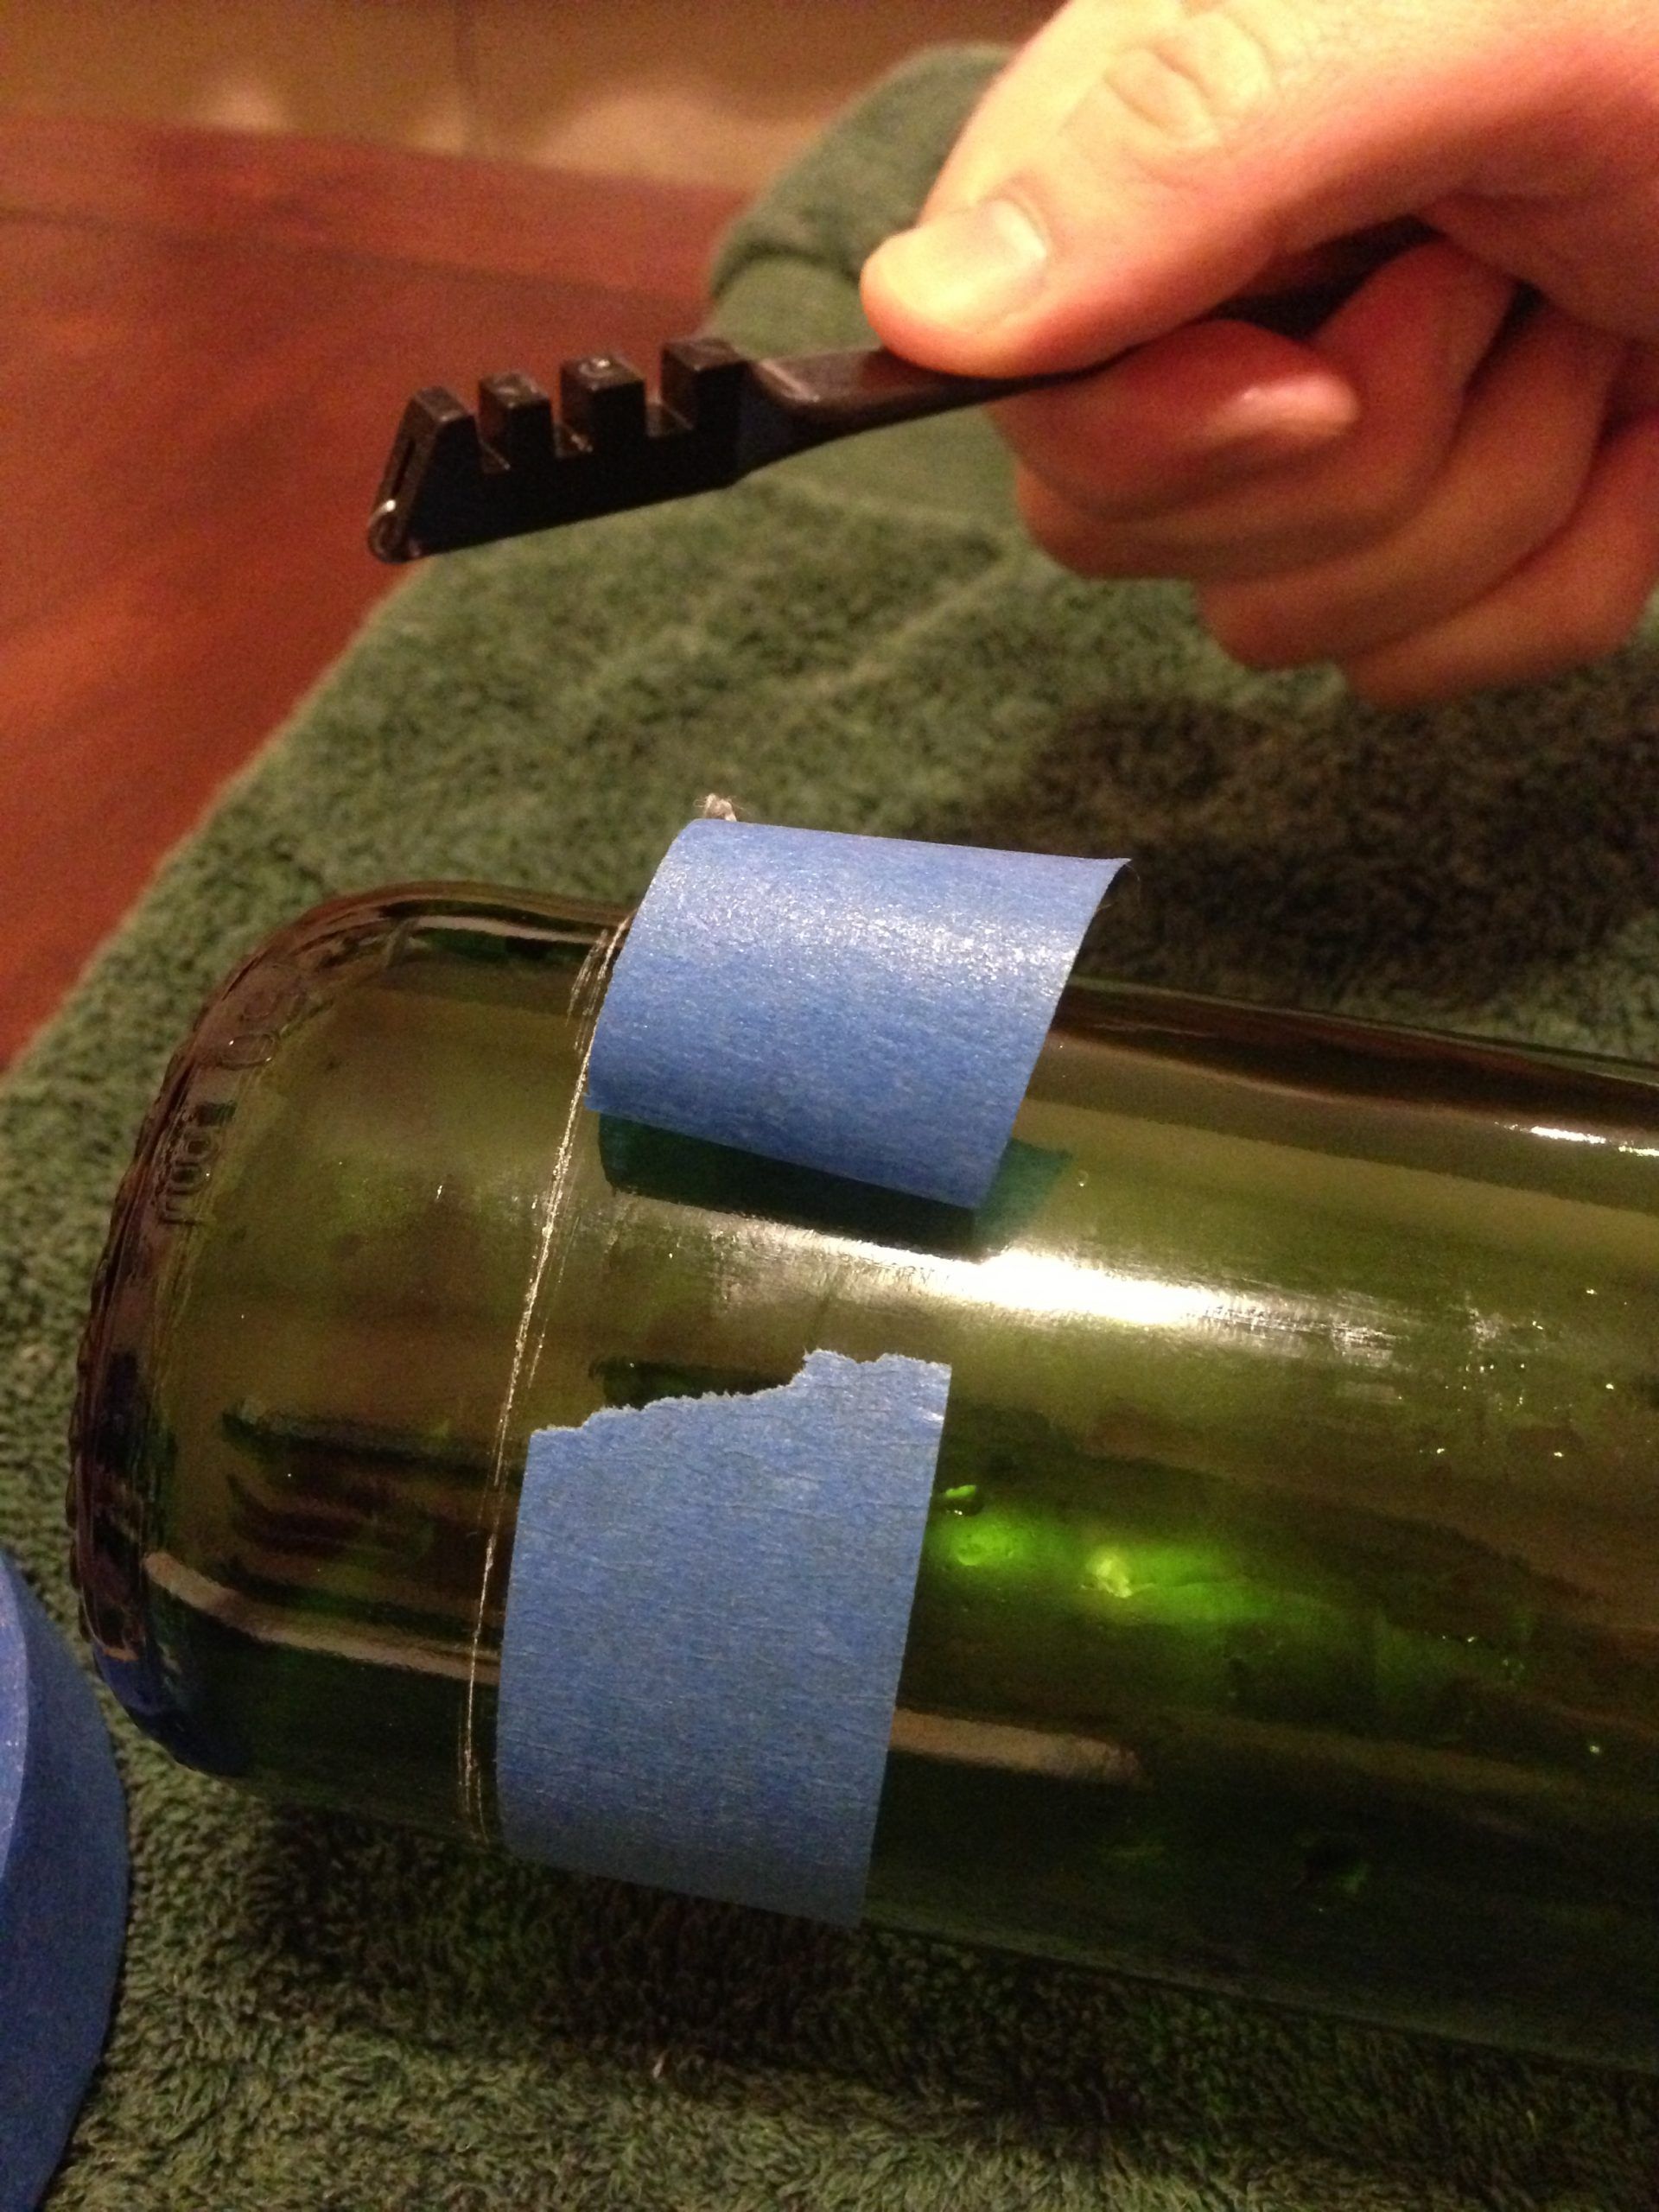 How to make wine bottle centerpieces